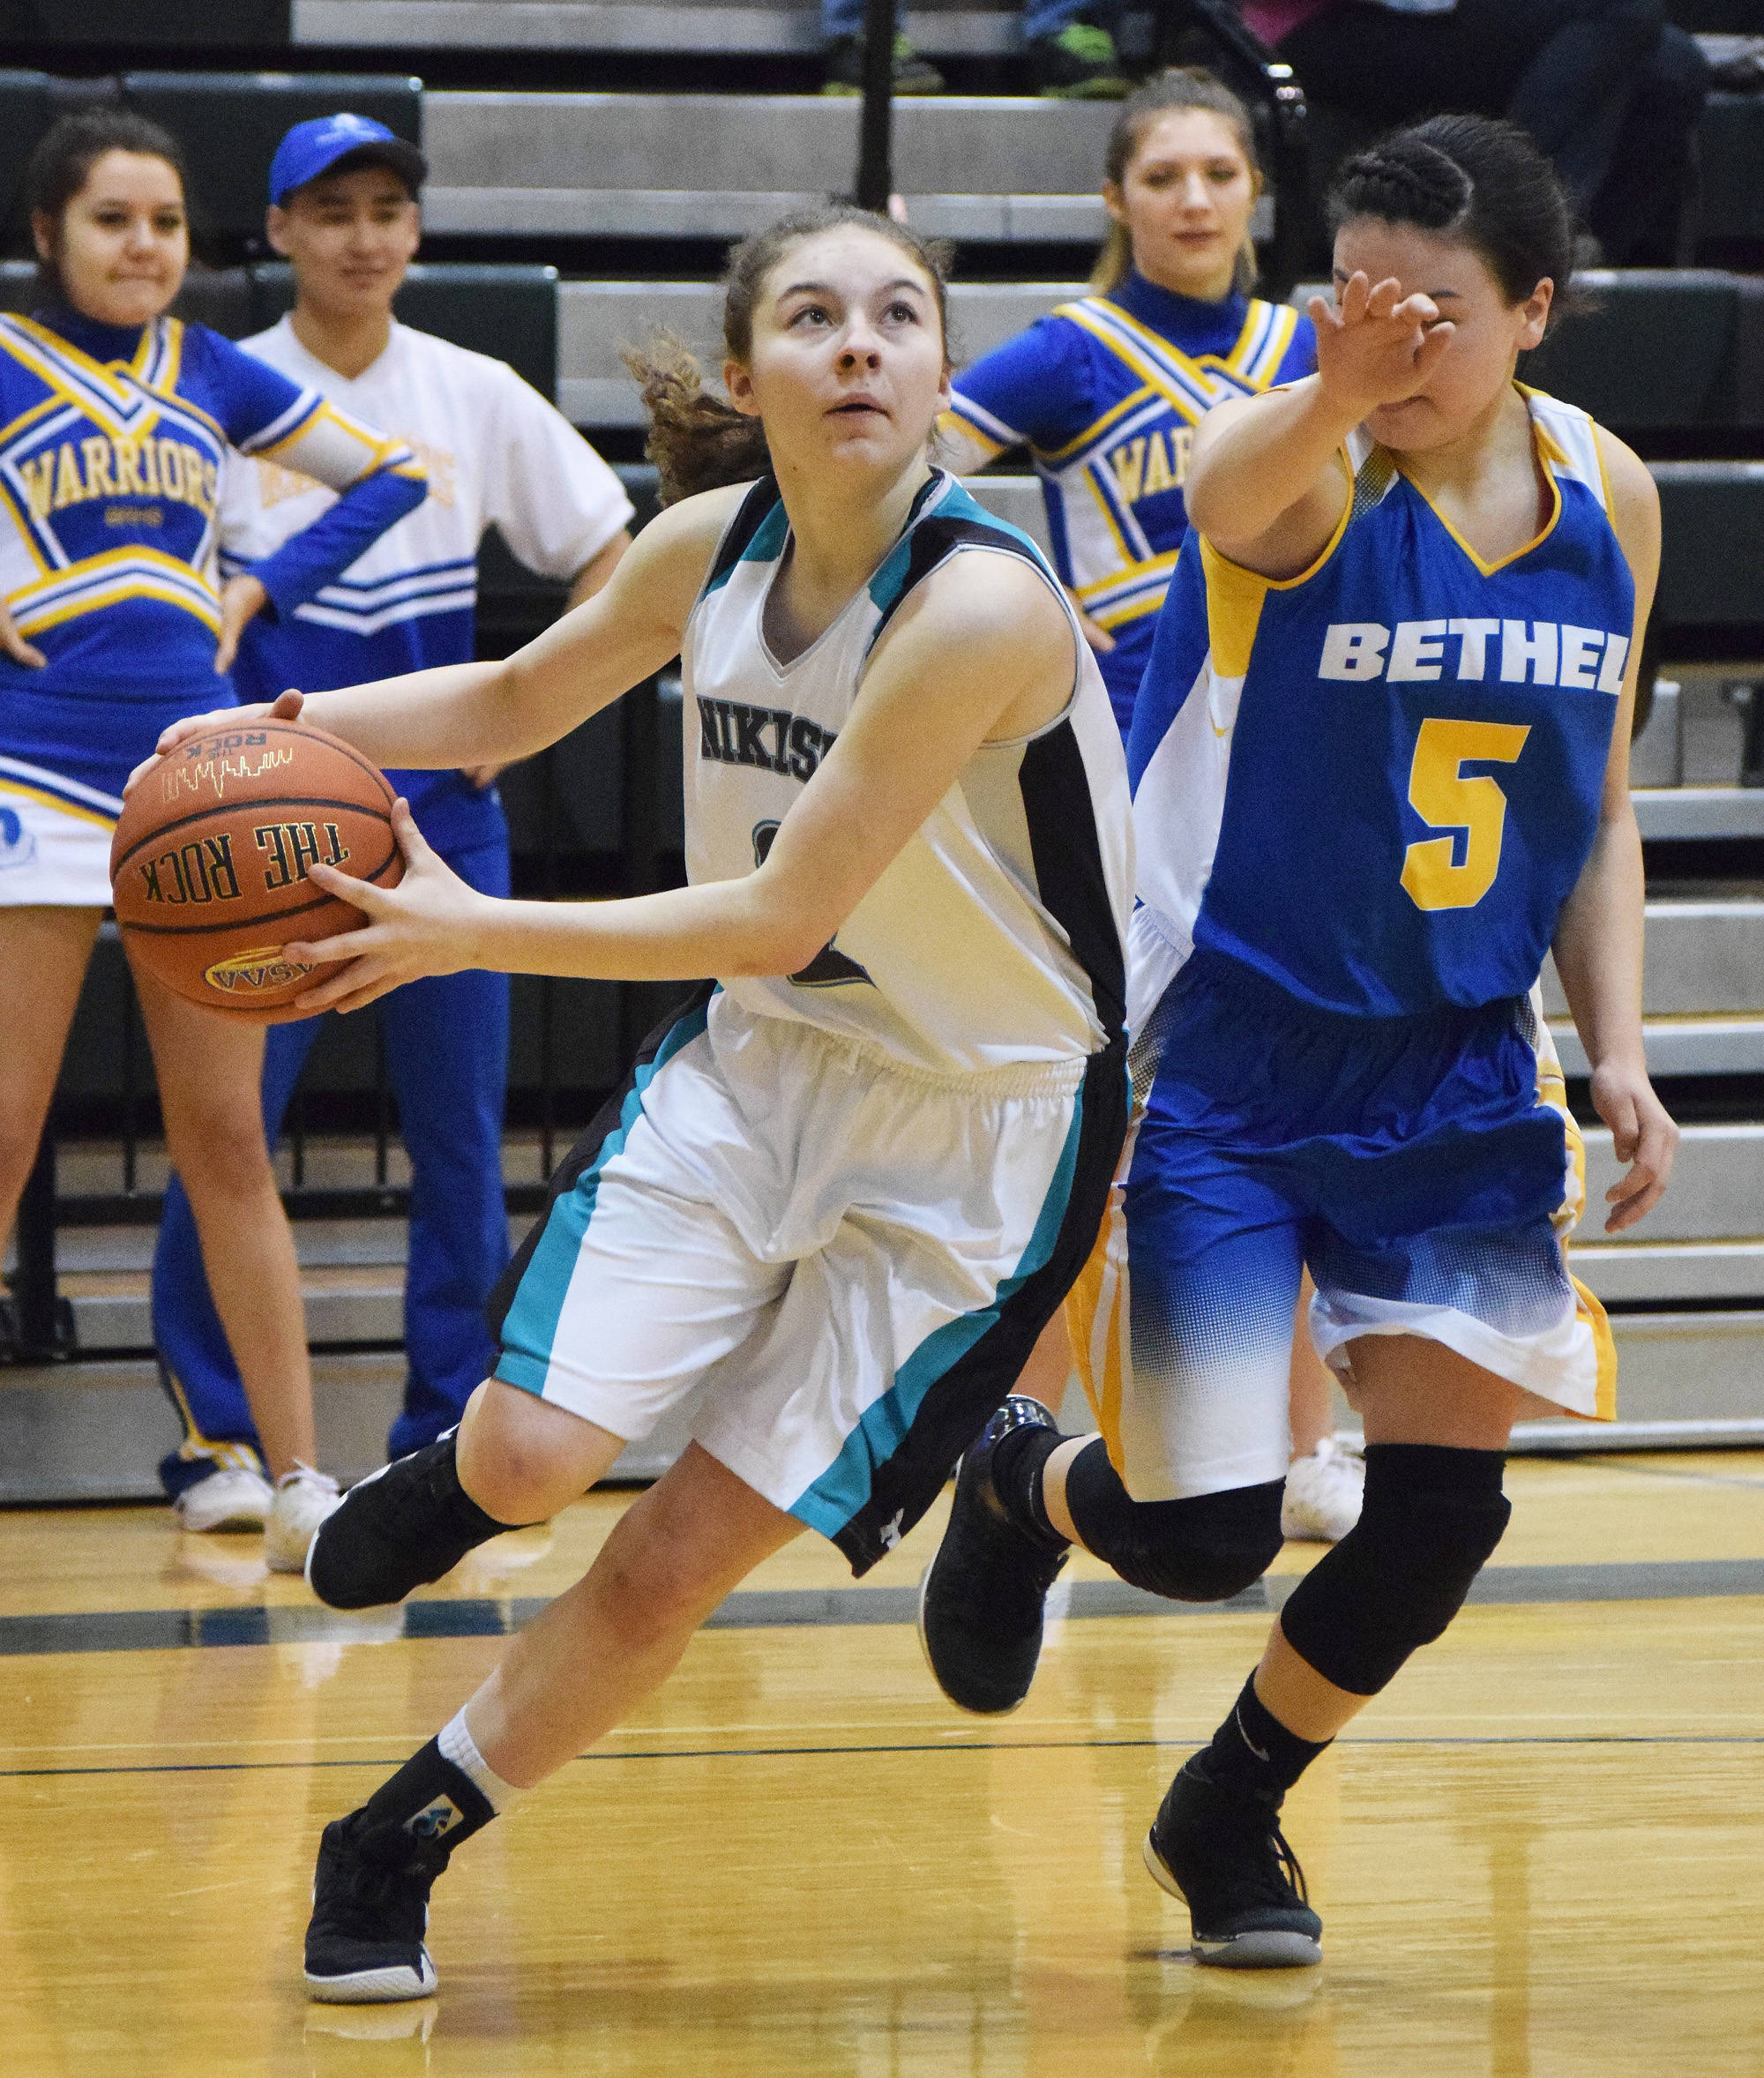 Nikiski’s America Jeffreys (left) drives the baseline against Bethel’s Dorothy Bukowski Saturday in the Class 3A girls state tournament fourth-place game at the UAA Wells Fargo Complex in Anchorage. (Photo by Joey Klecka/Peninsula Clarion)